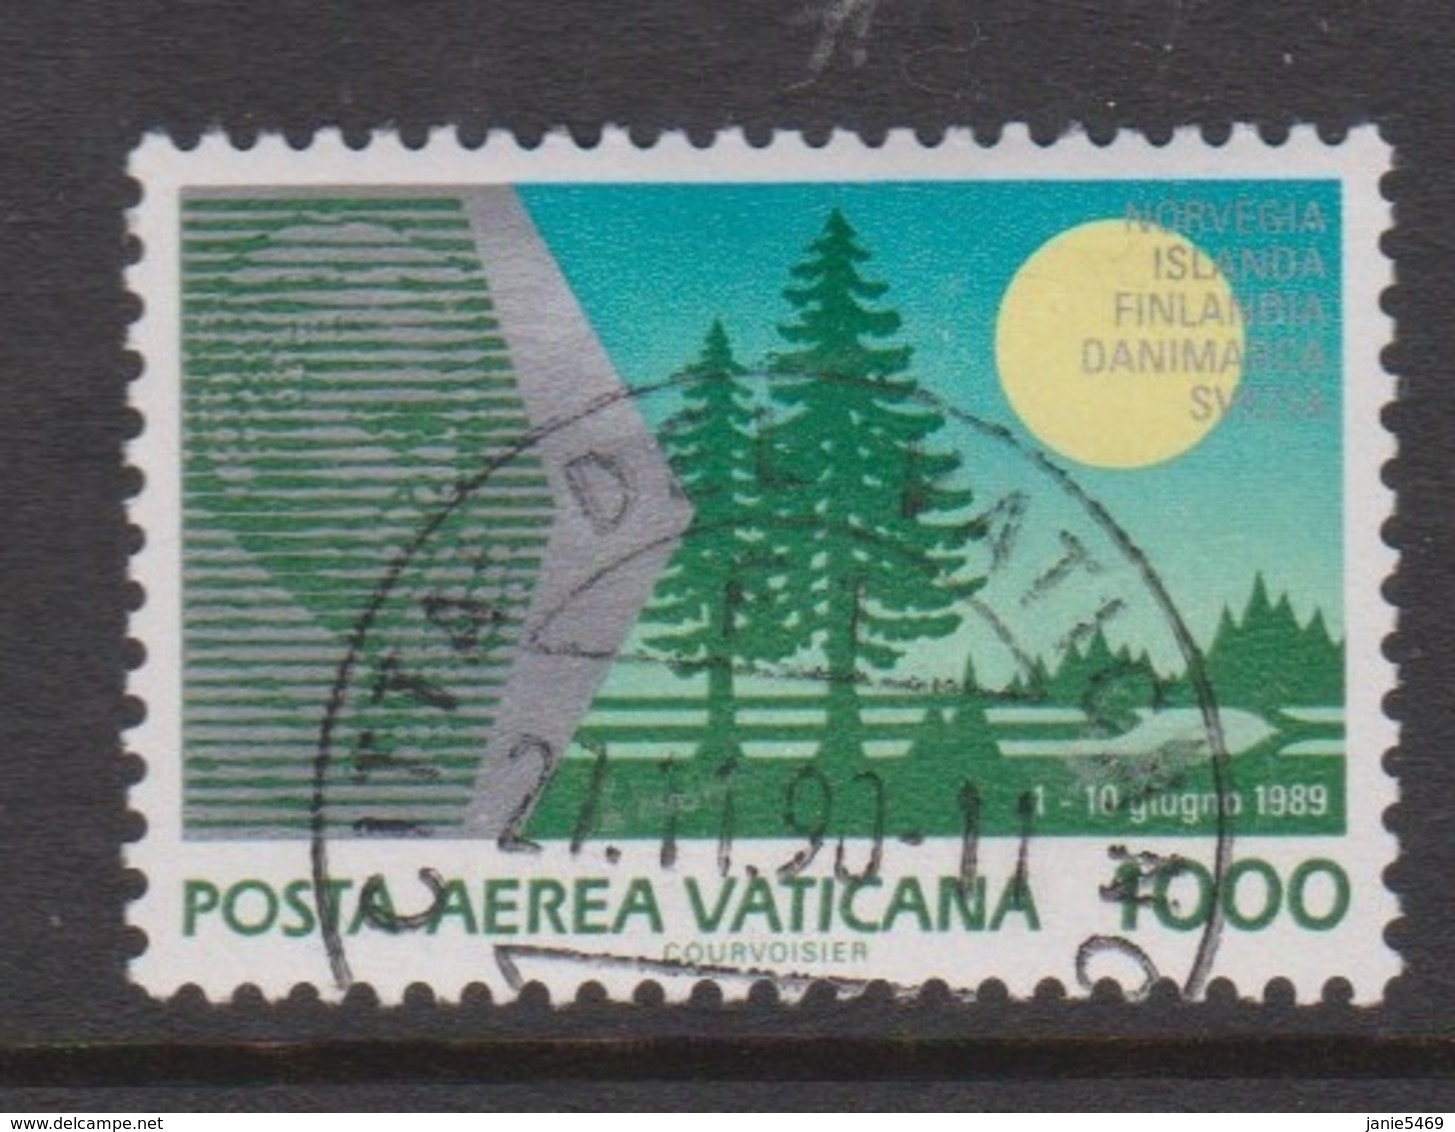 Vatican City AP 91 1990 Pope Travels During 1989  .1000 Lire ,used - Used Stamps